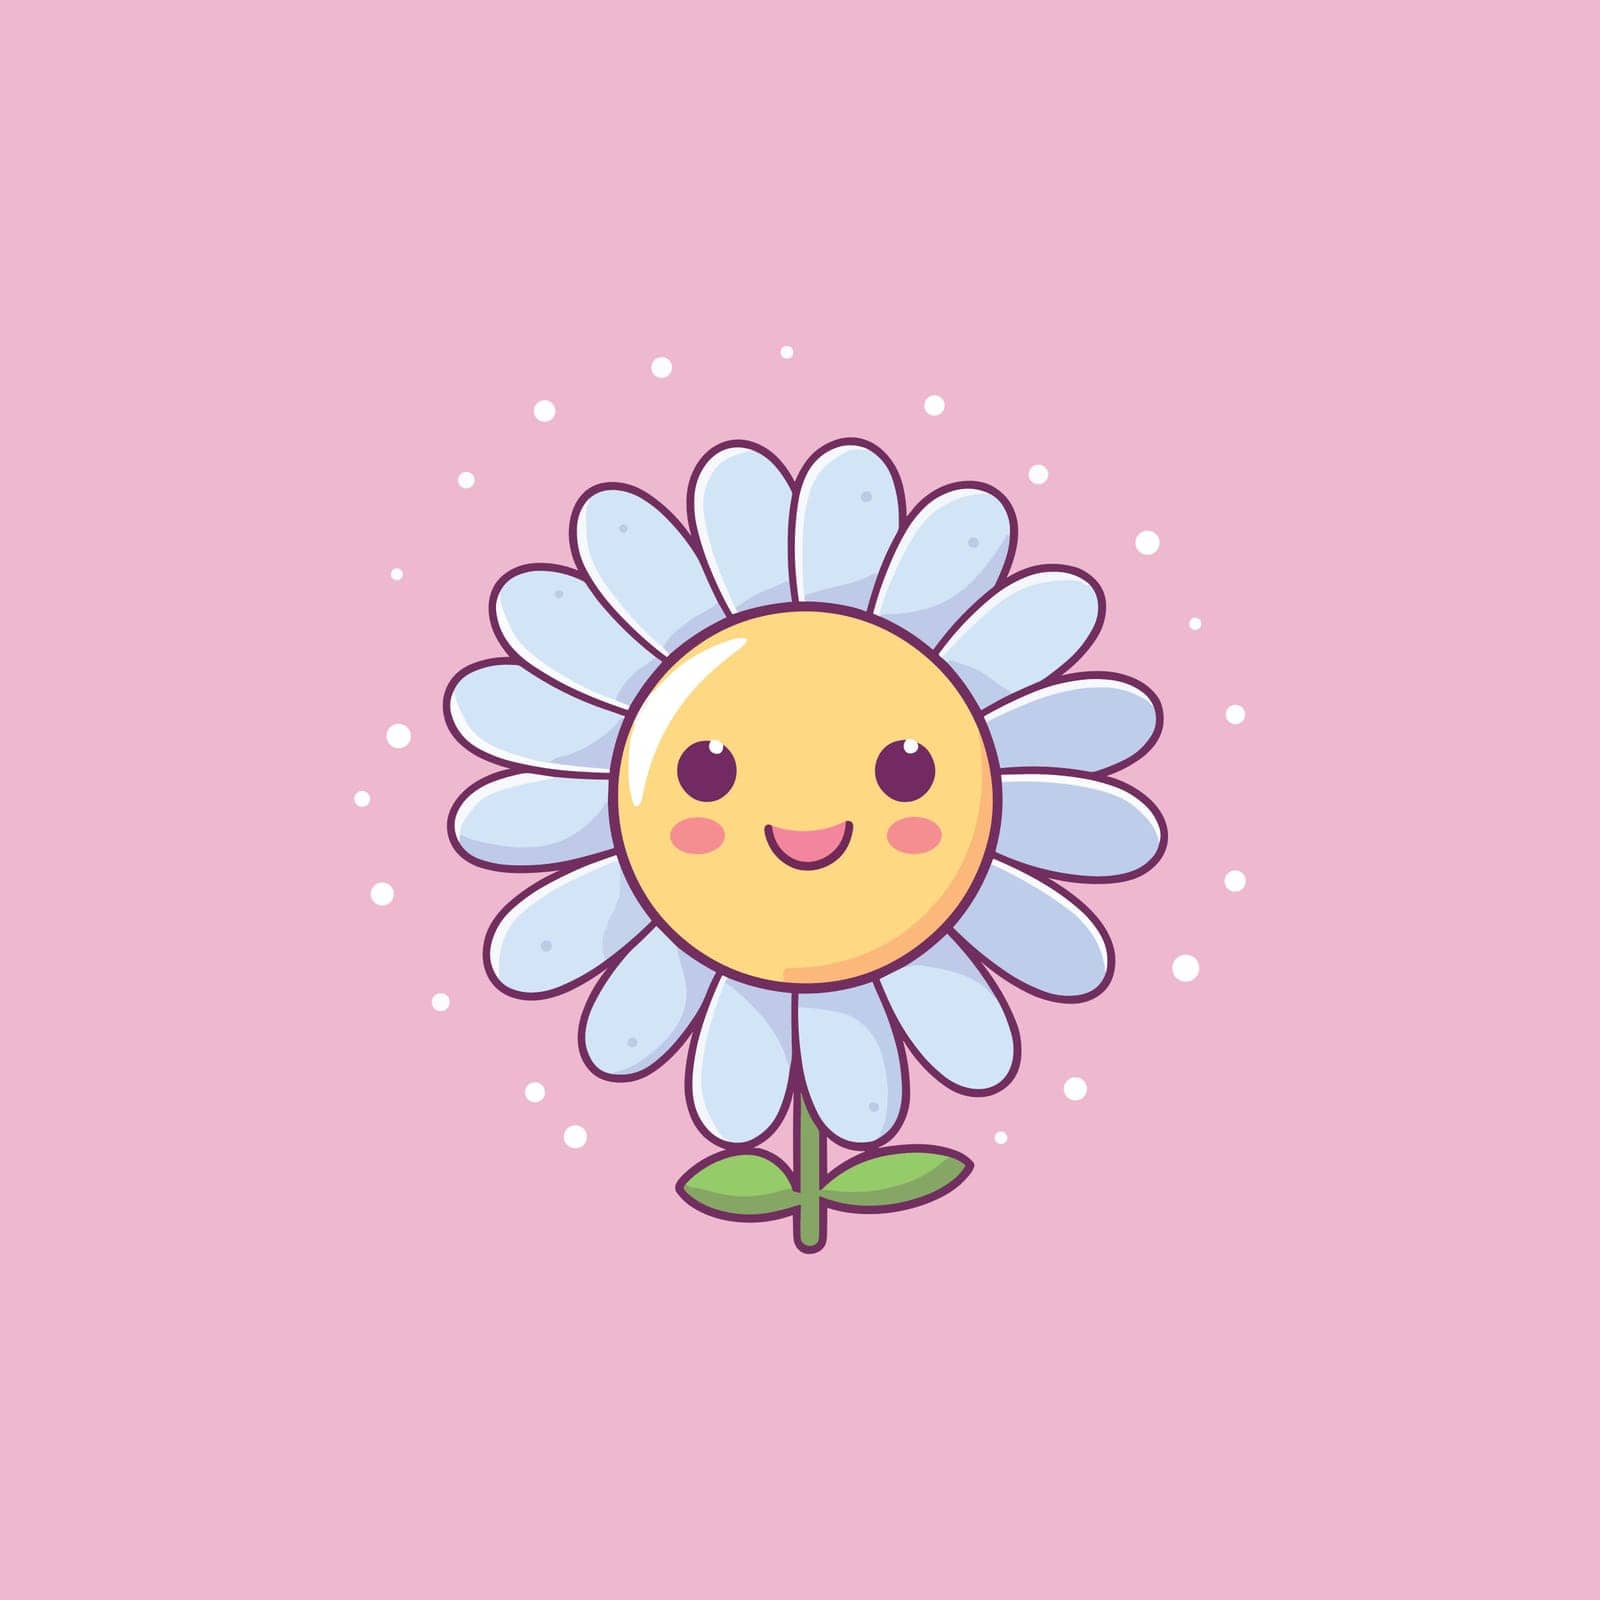 Flower cartoon character with a cute smile by Vinhsino